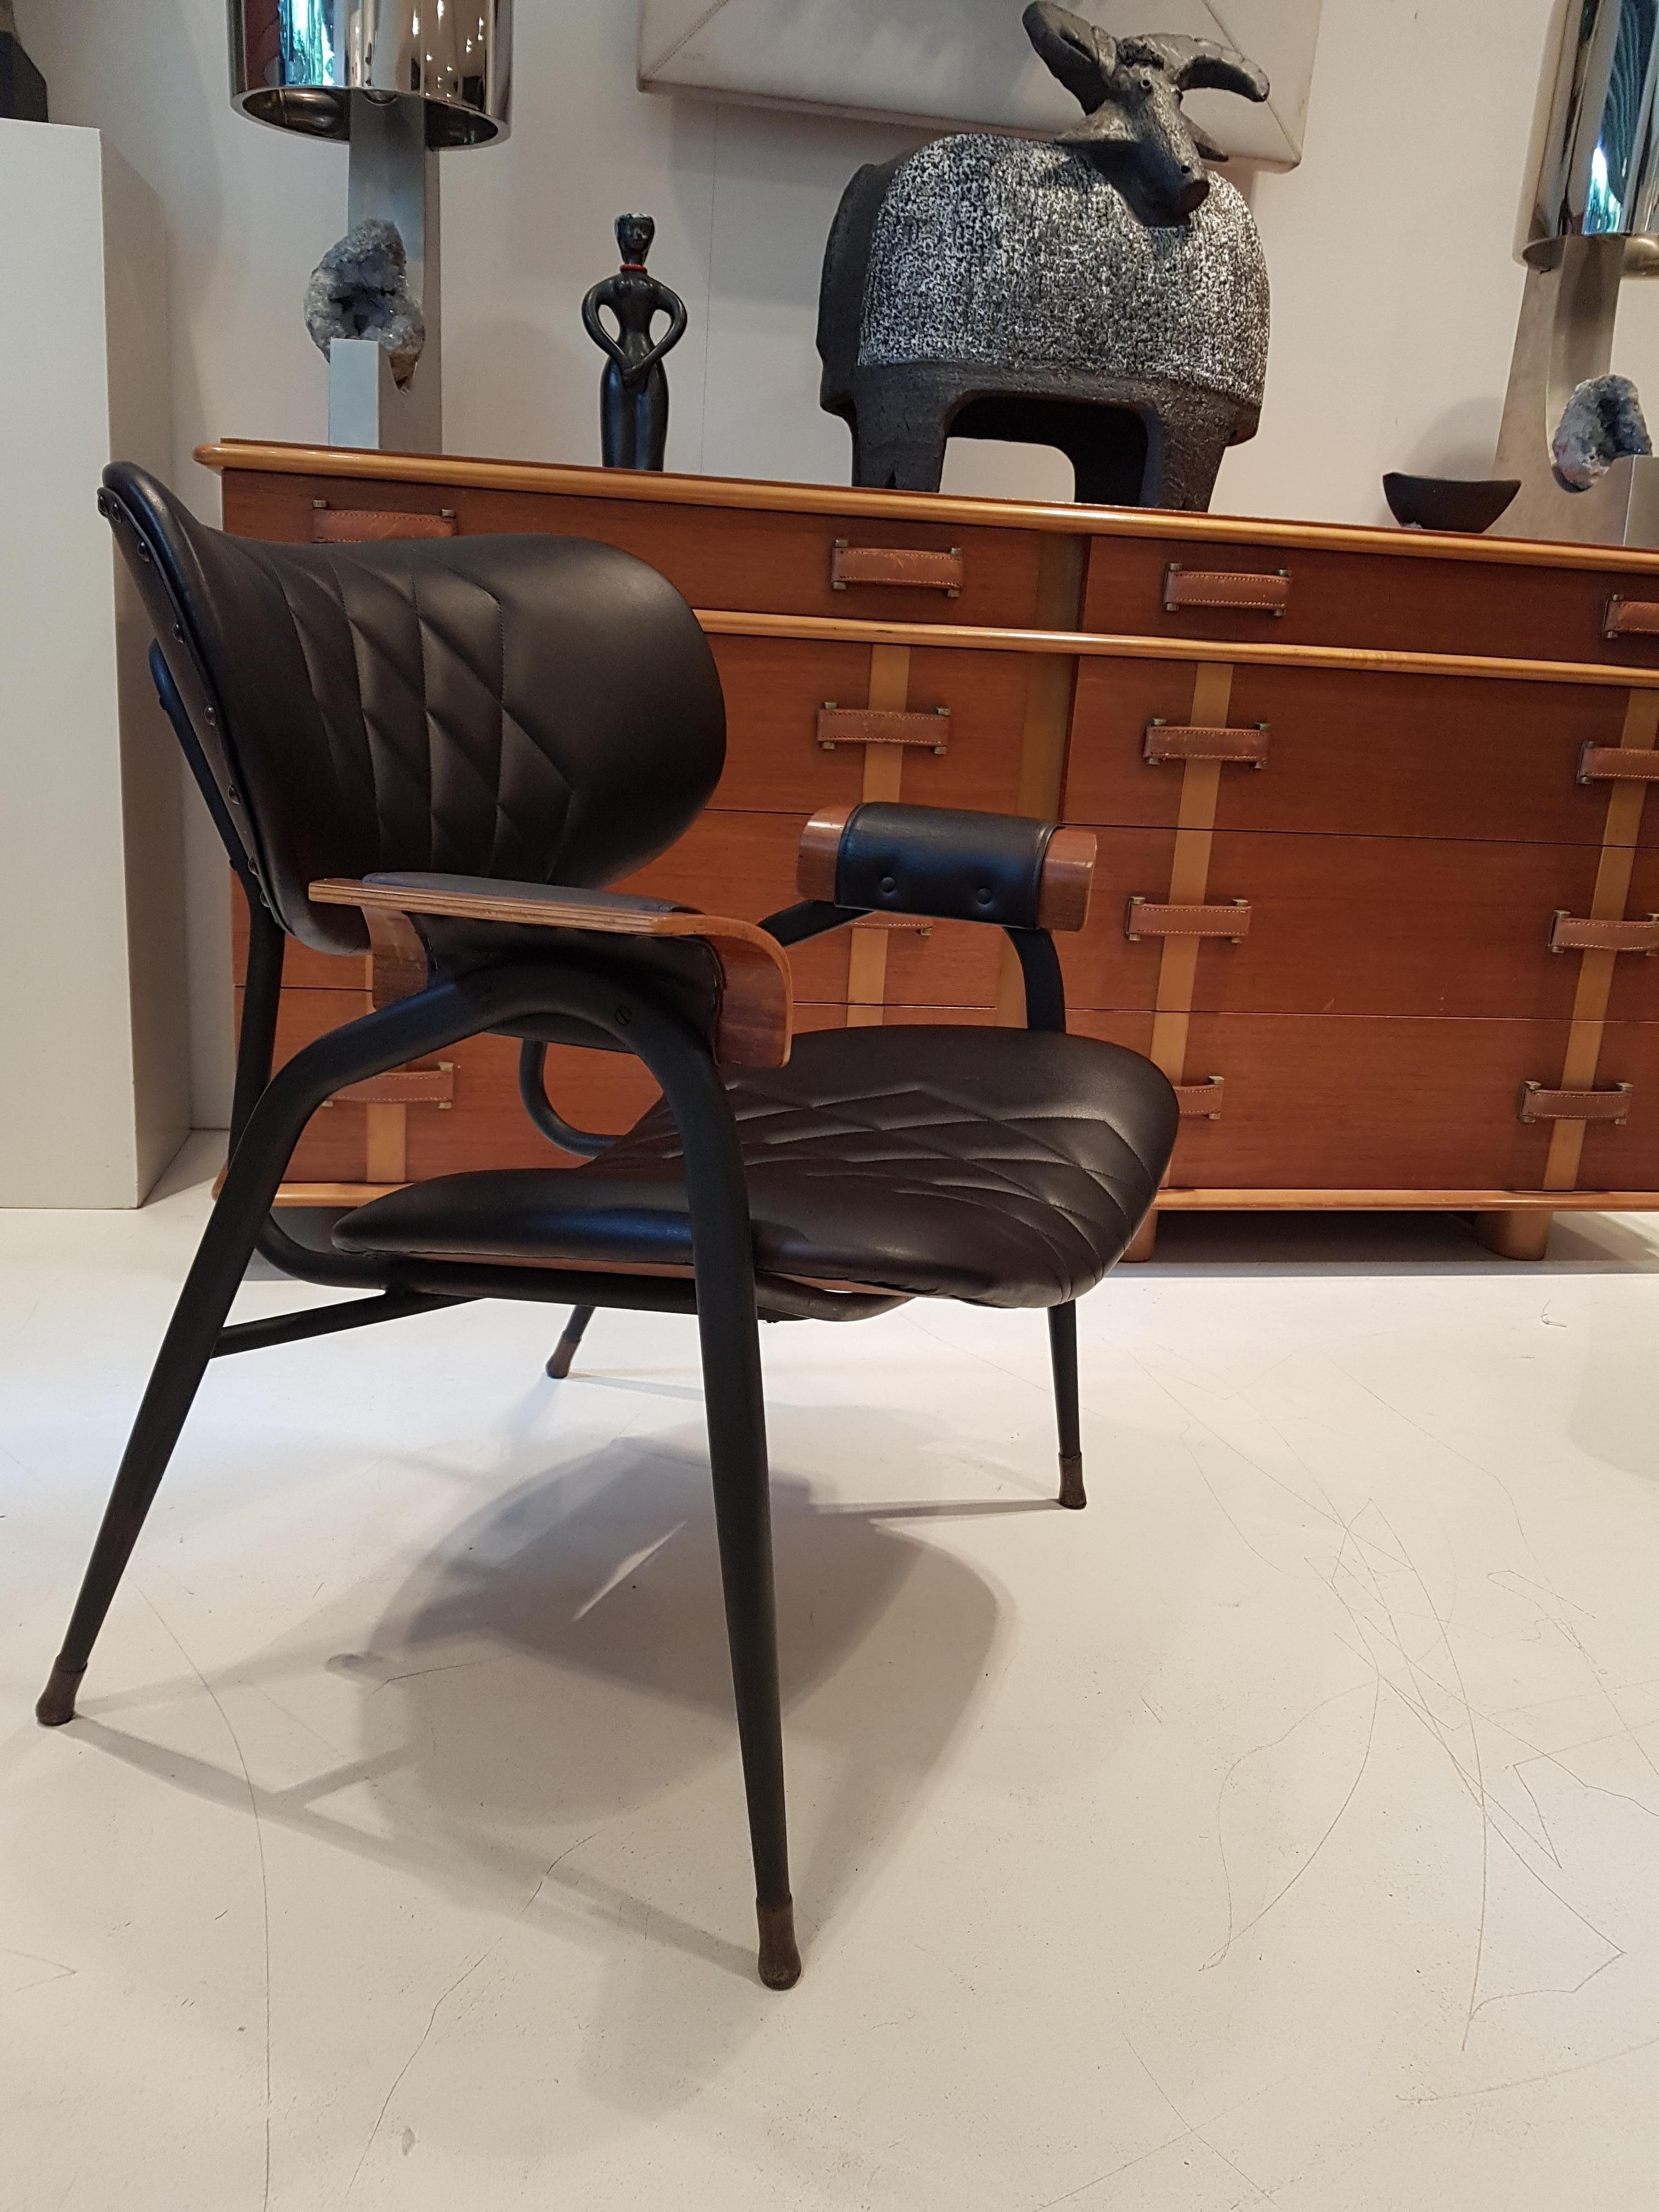 Pair of black lacquered metal framed armchairs with polished wooden arm rests reupholstered in black leather by Rima.